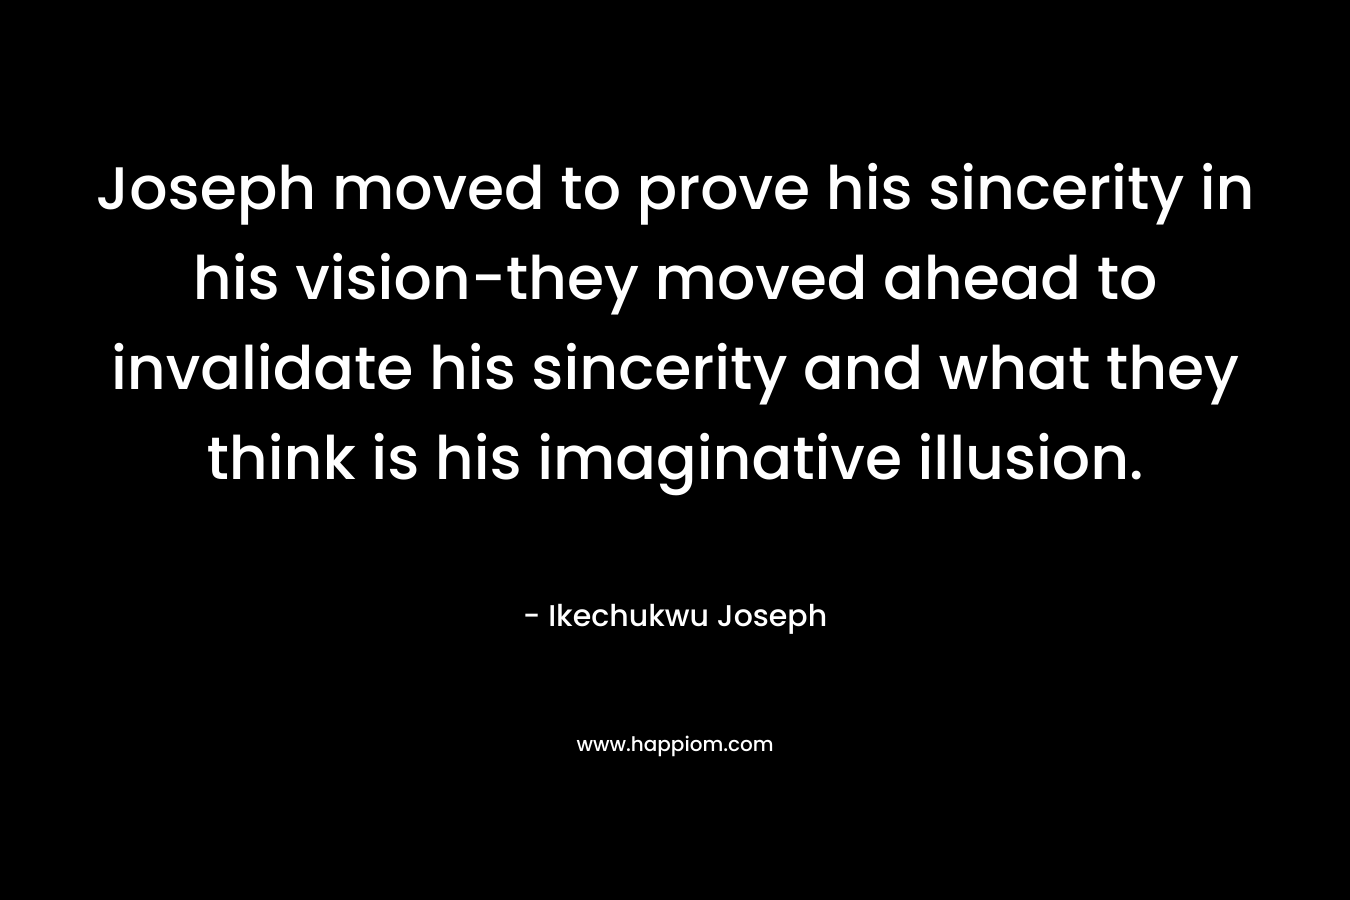 Joseph moved to prove his sincerity in his vision-they moved ahead to invalidate his sincerity and what they think is his imaginative illusion.